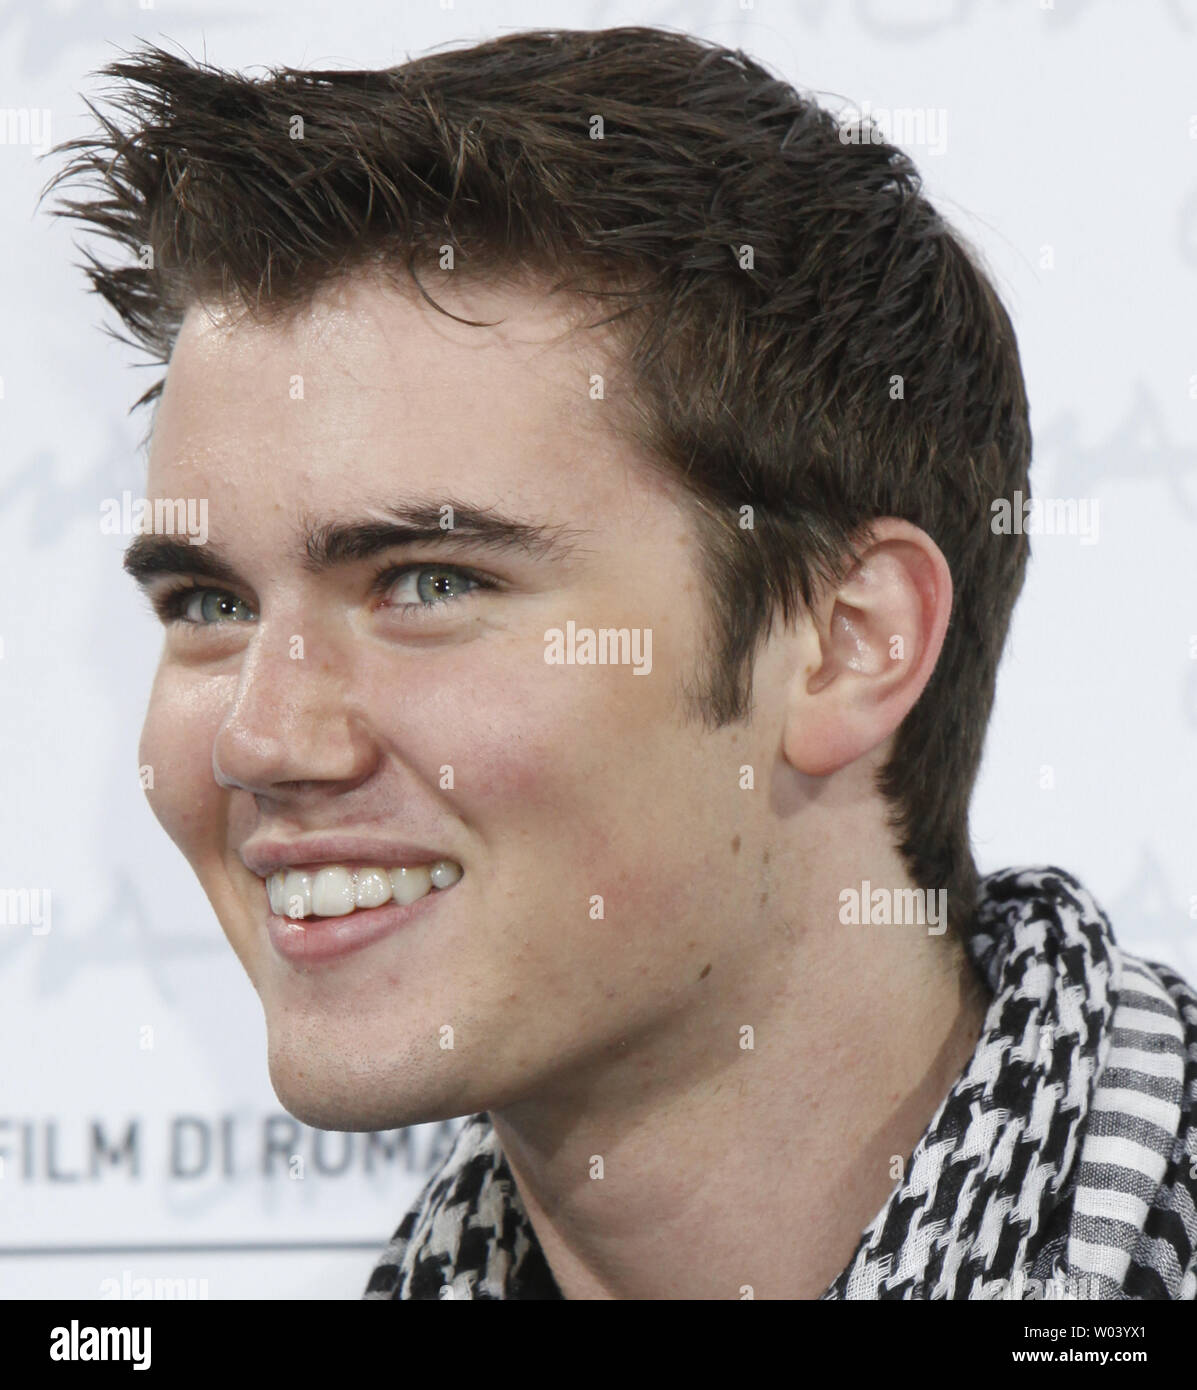 Cameron Bright arrives at a photocall for the film 'The Twilight Saga: New Moon' during the 4th Rome International Film Festival in Rome on October 22, 2009.   UPI Photo/David Silpa Stock Photo